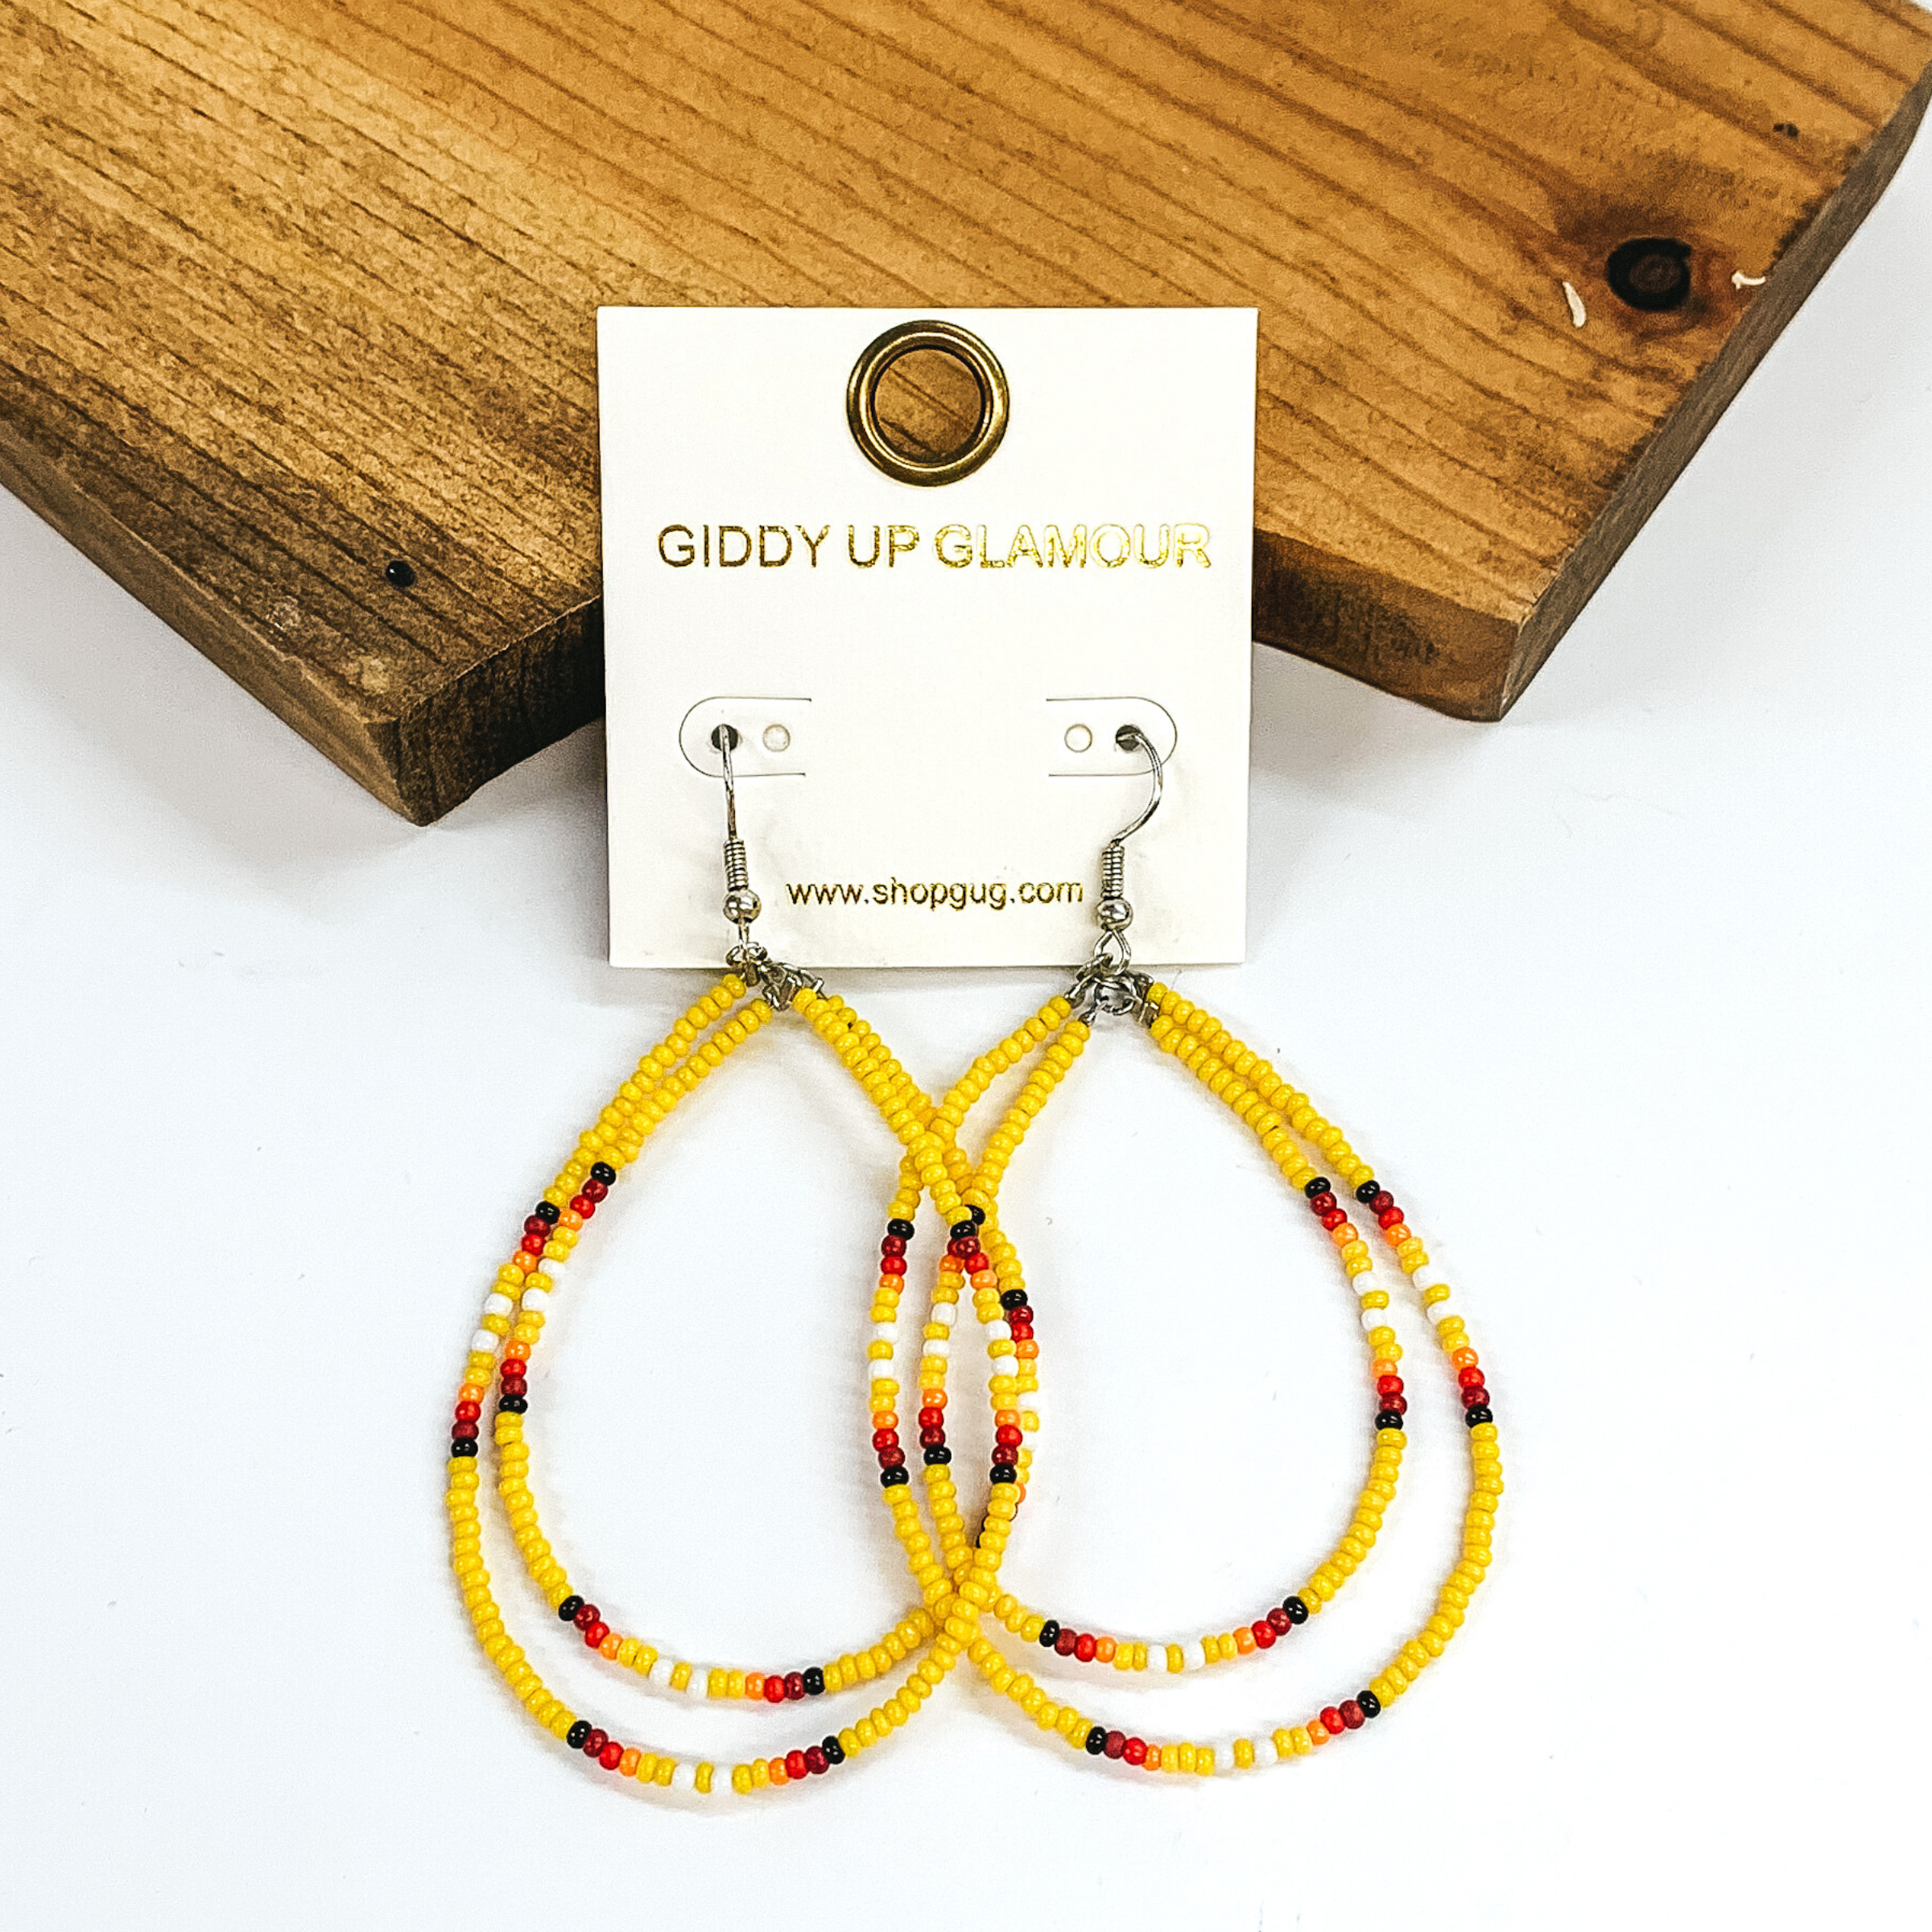 Double layered, hanging beaded teardrop earrings. The majority of the beads are yellow with three segements including maroon, red, yellow, white, and black beads. hese earrings are pictured on a white background in front of a dark piece of wood. 